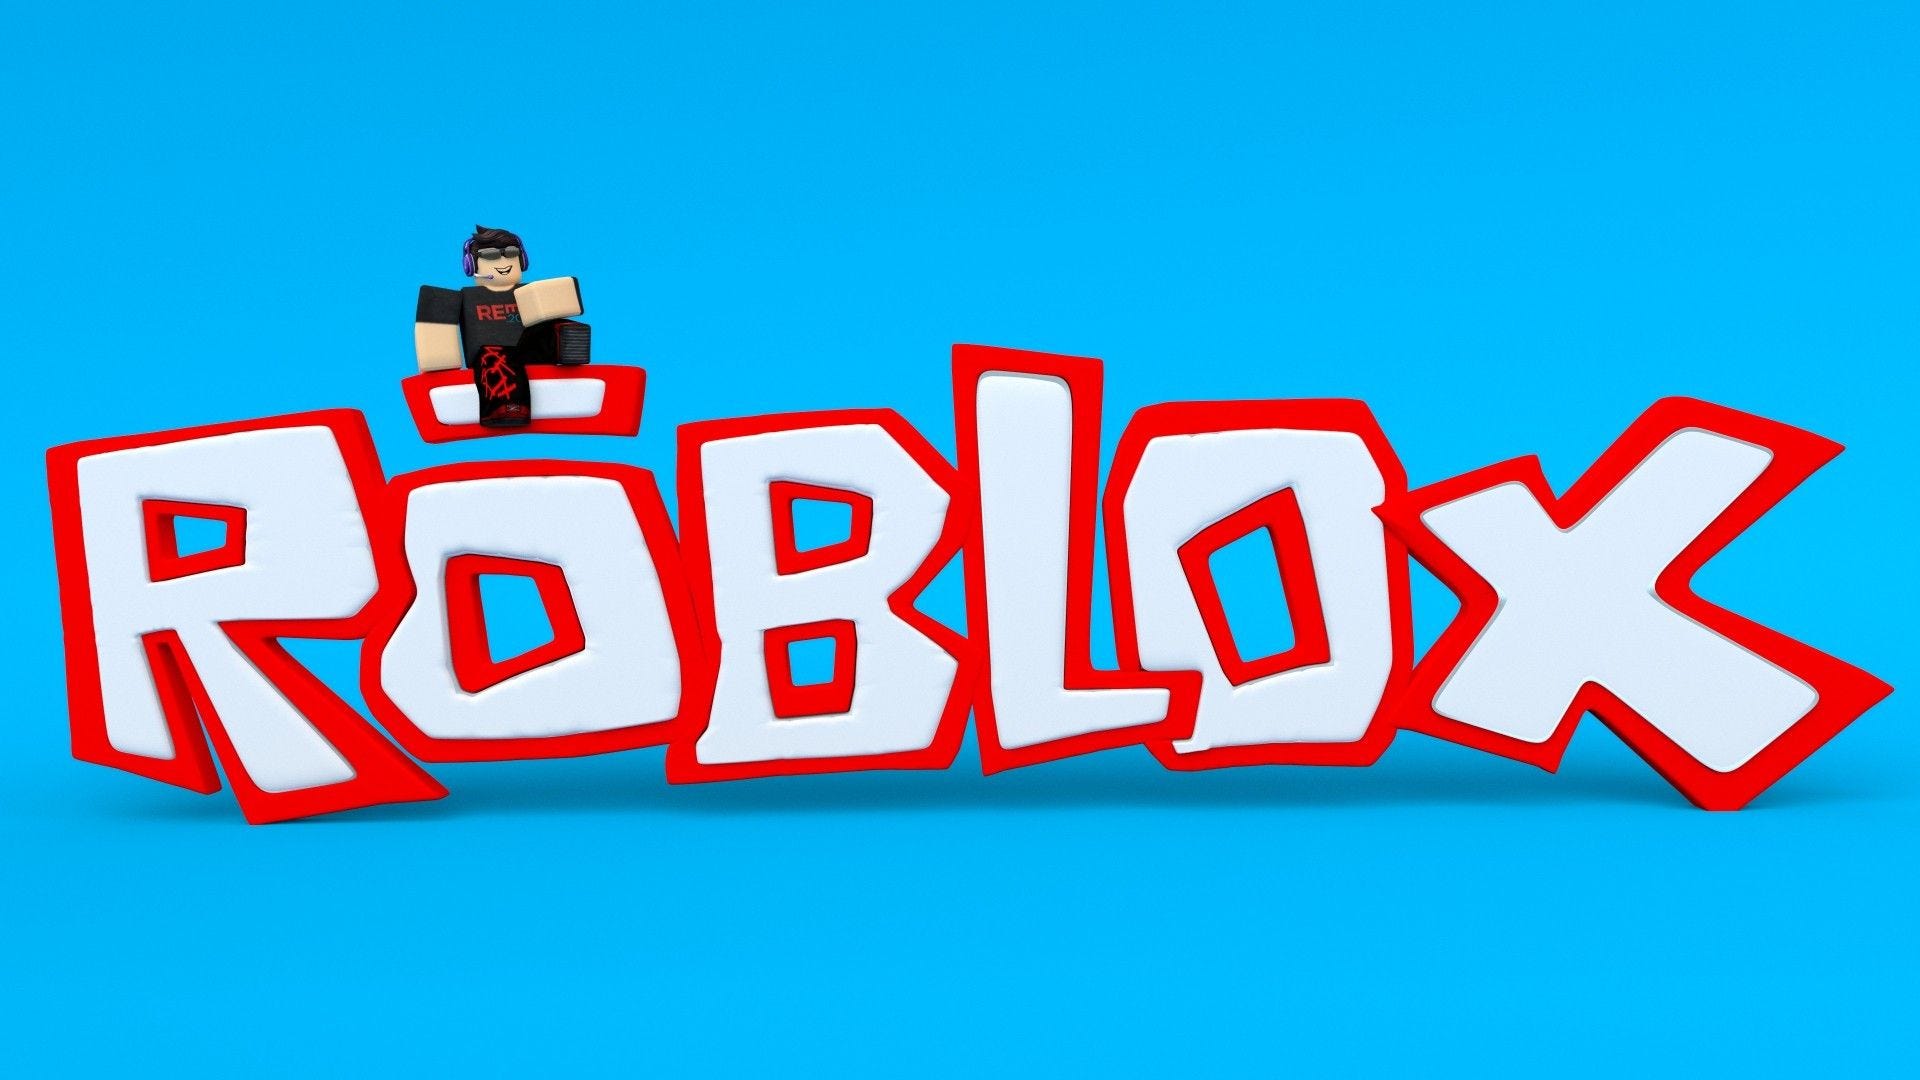 Roblox Free Robux Generator 2020 No Survey By Bennettcrane Sep 2020 Medium - how to get free robux with no survey